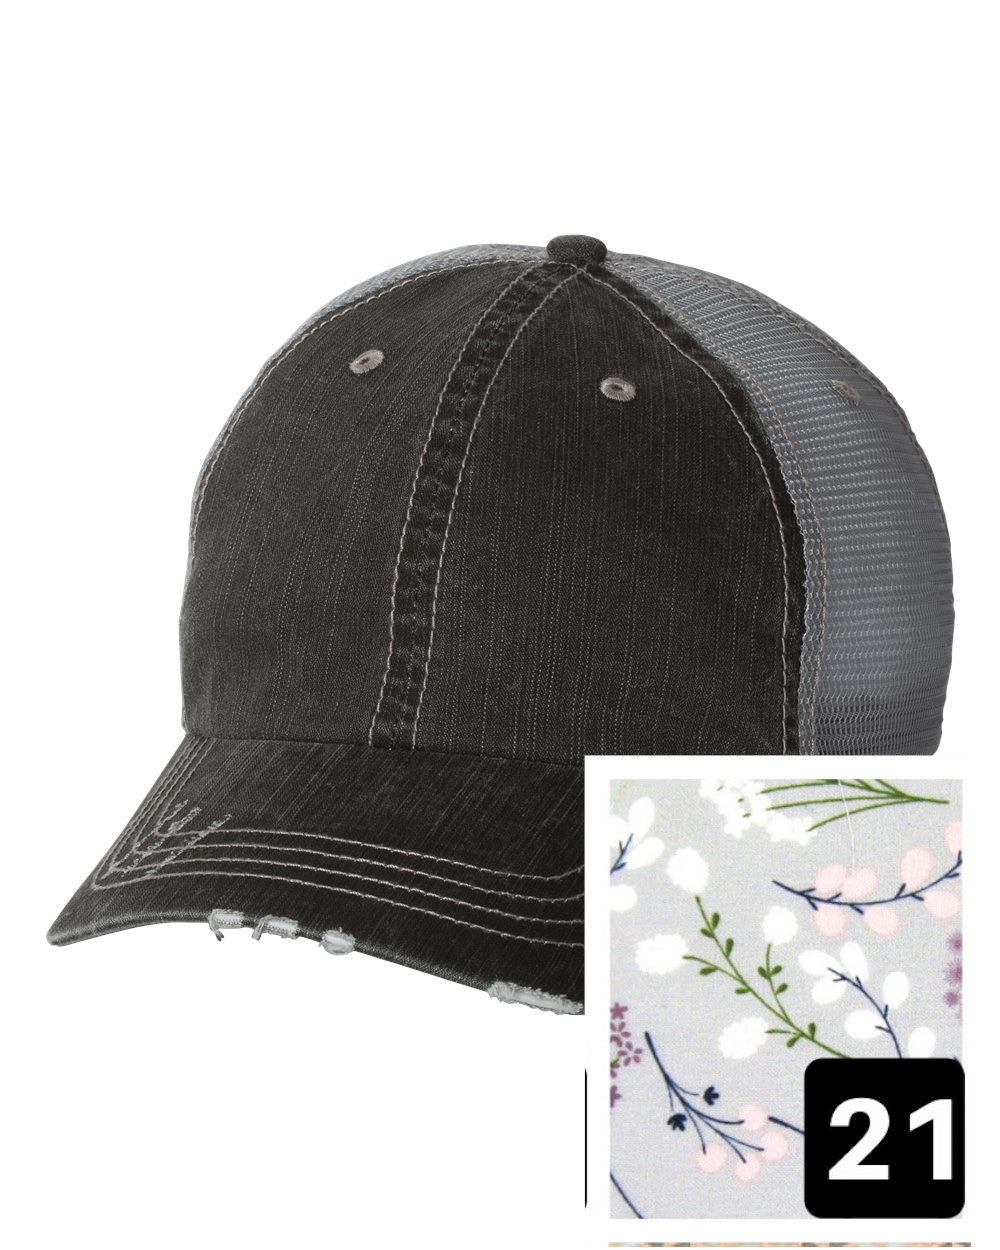 gray distressed trucker hat with yellow and white floral fabric state of Connecticut